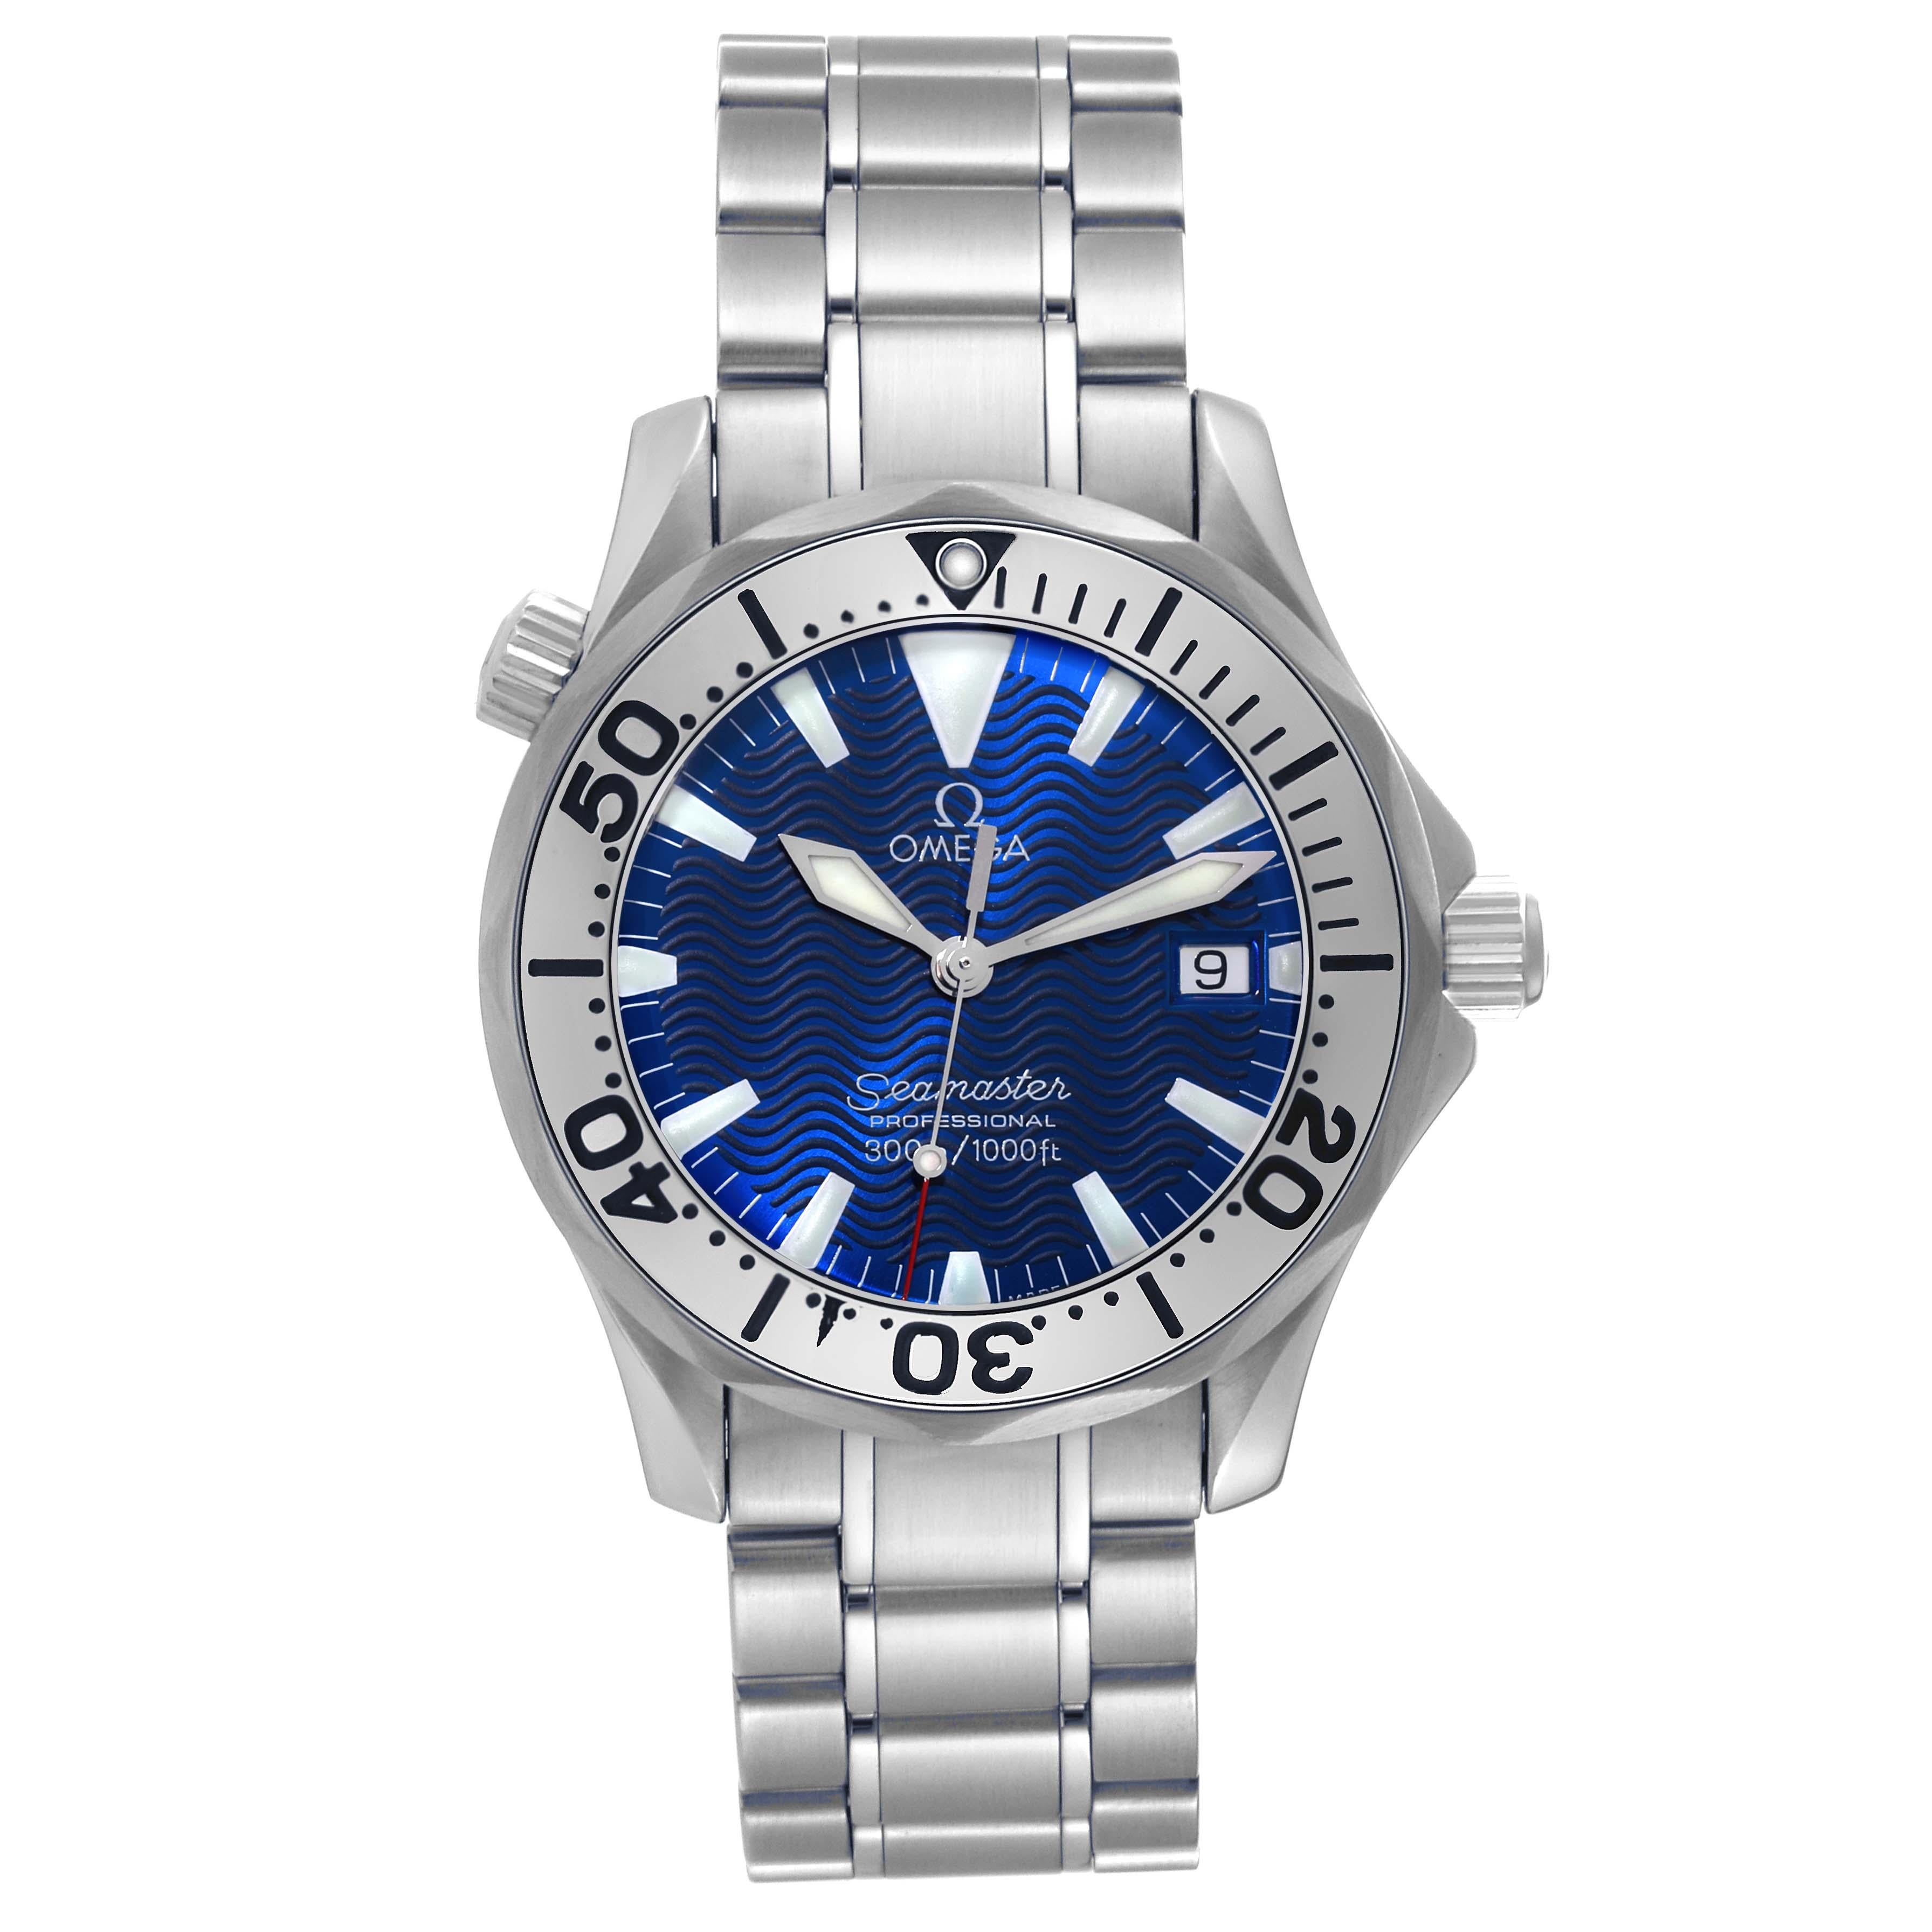 Omega Seamaster Electric Blue Wave Dial Midsize Steel Mens Watch 2263.80.00. Quartz precision movement. Stainless steel case 36.2 mm in diameter.  Omega logo on the crown. Polished stainless steel unidirectional rotating bezel. Scratch resistant